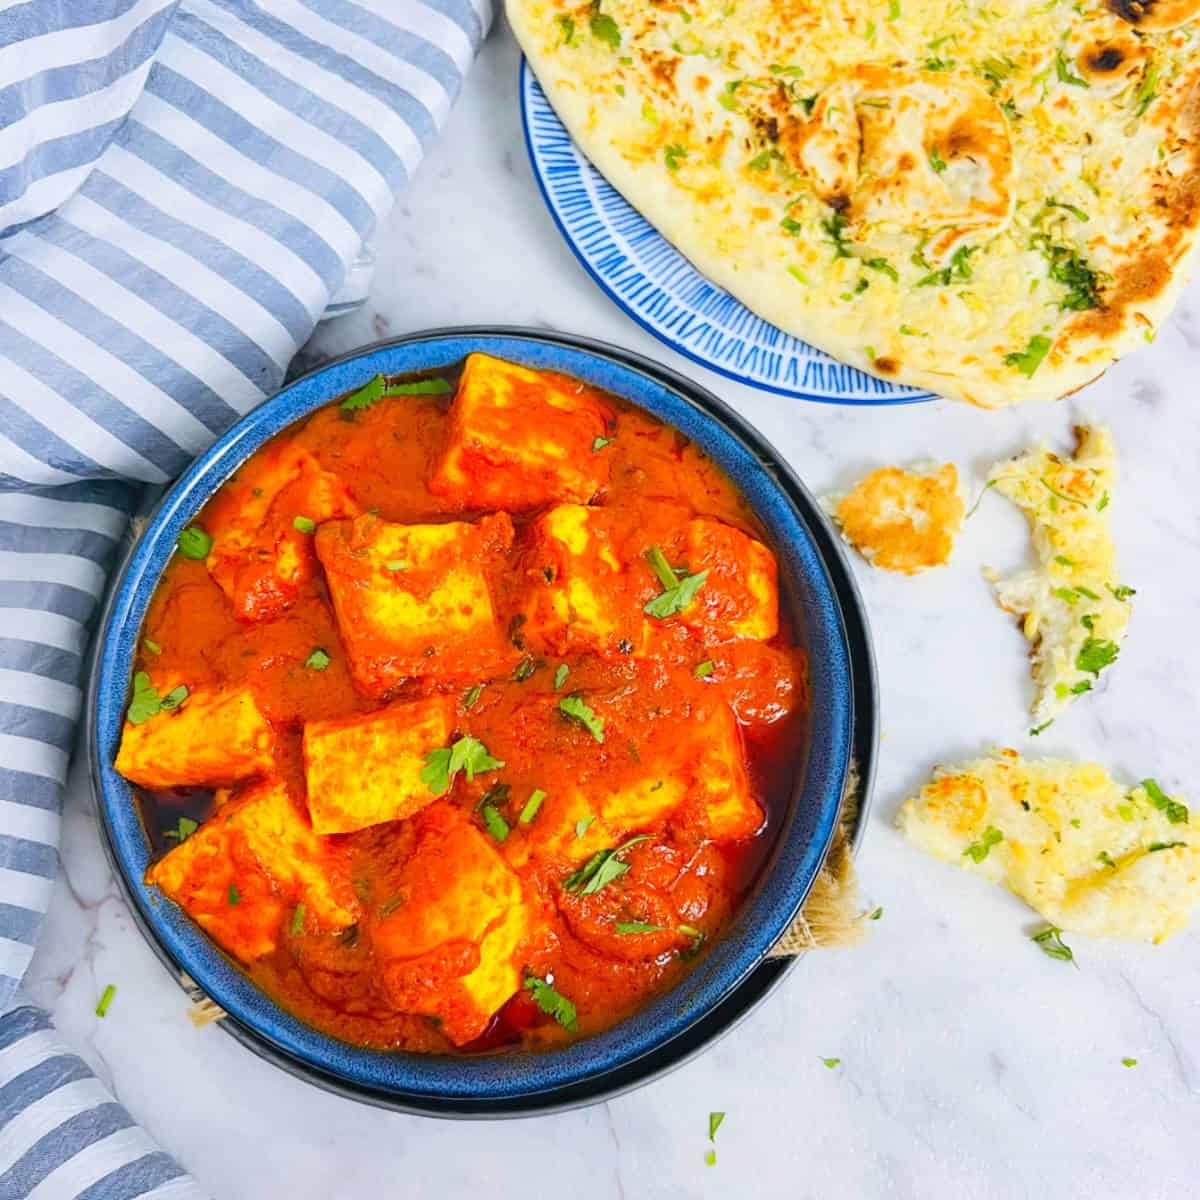 This butter paneer recipe will fulfill your takeaway cravings!